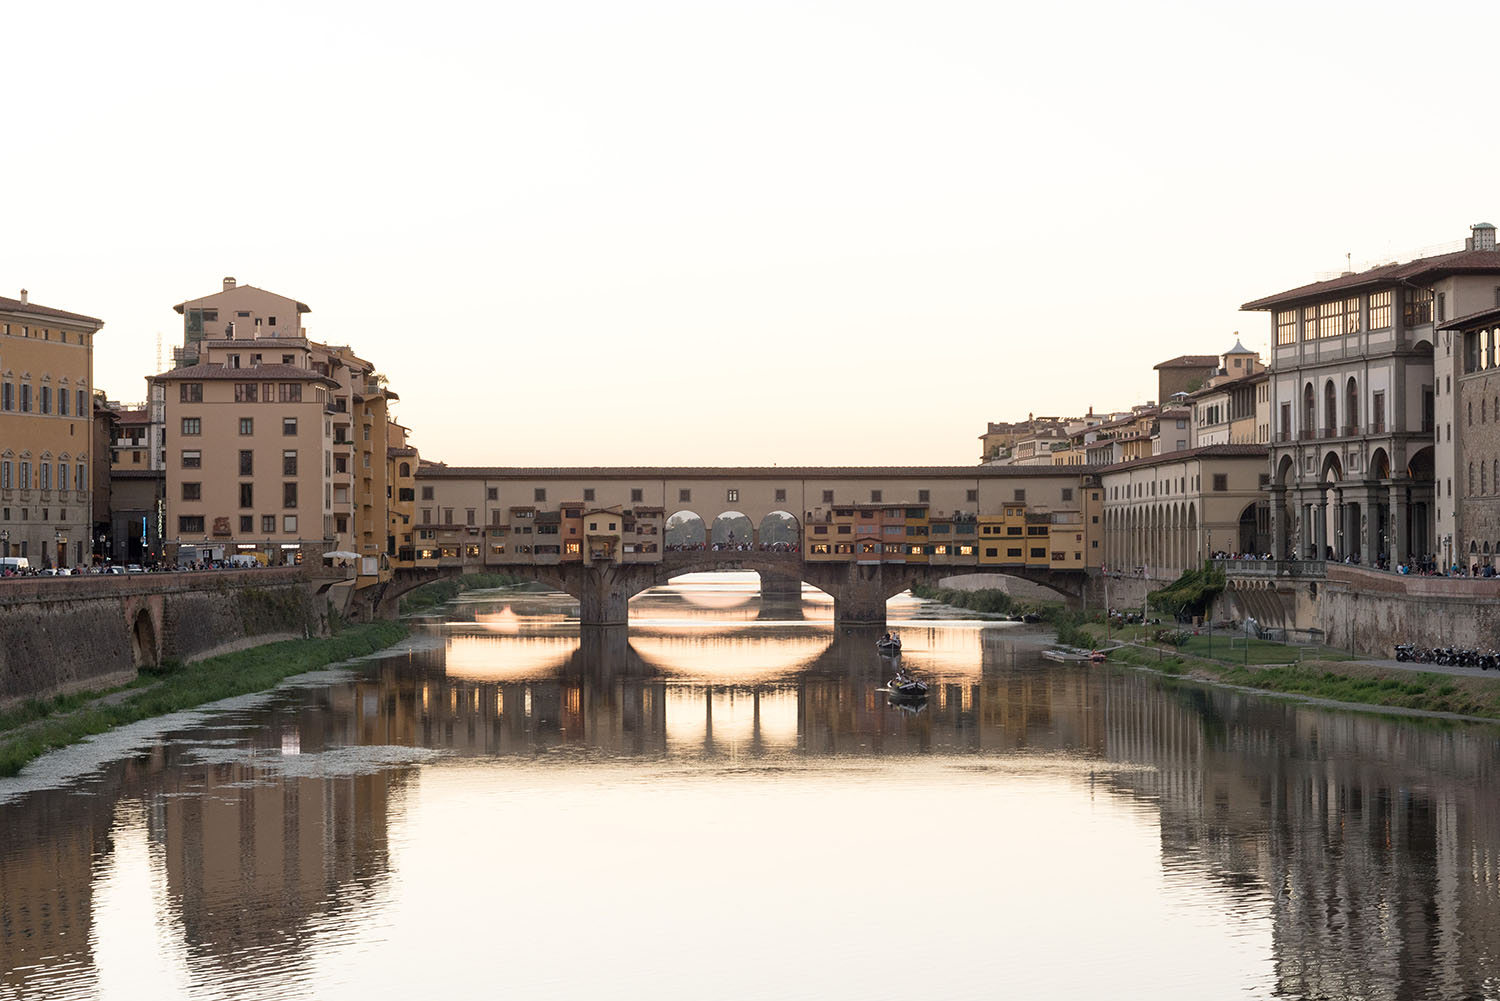 Sunset over Ponte Vecchio in Florence, Italy, as captured by top Canadian travel blogger Cee Fardoe of Coco & Vera